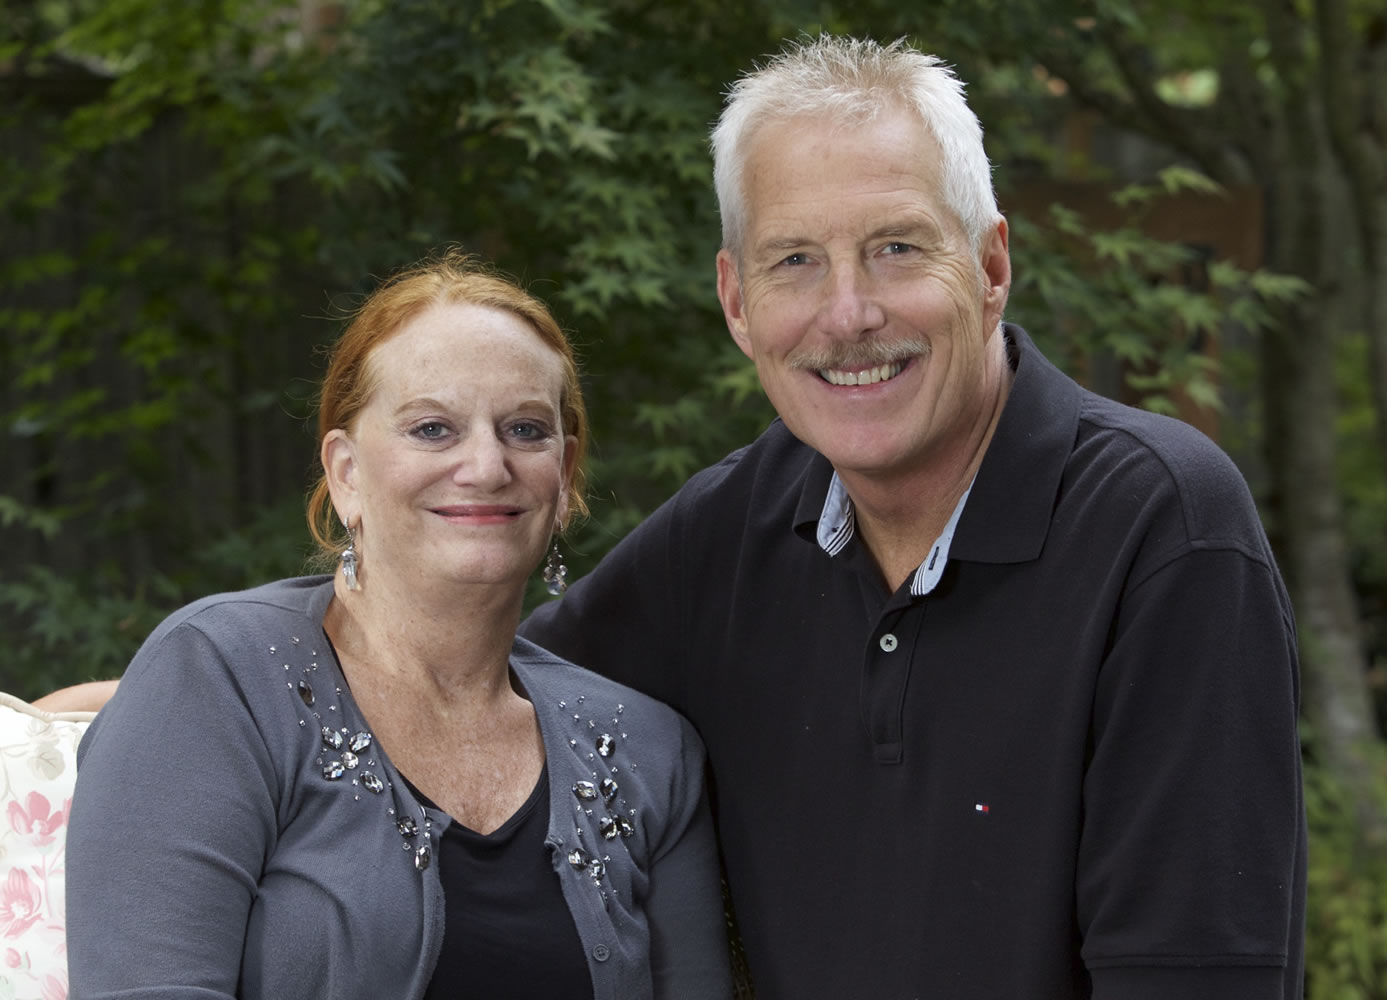 Brian Norske had been with Jori for just a few months when she was diagnosed with breast cancer and eventually had a double mastectomy. &quot;The relationship goes on the back burner. The thing that becomes a priority is your partner getting well and staying well,&quot; he said.